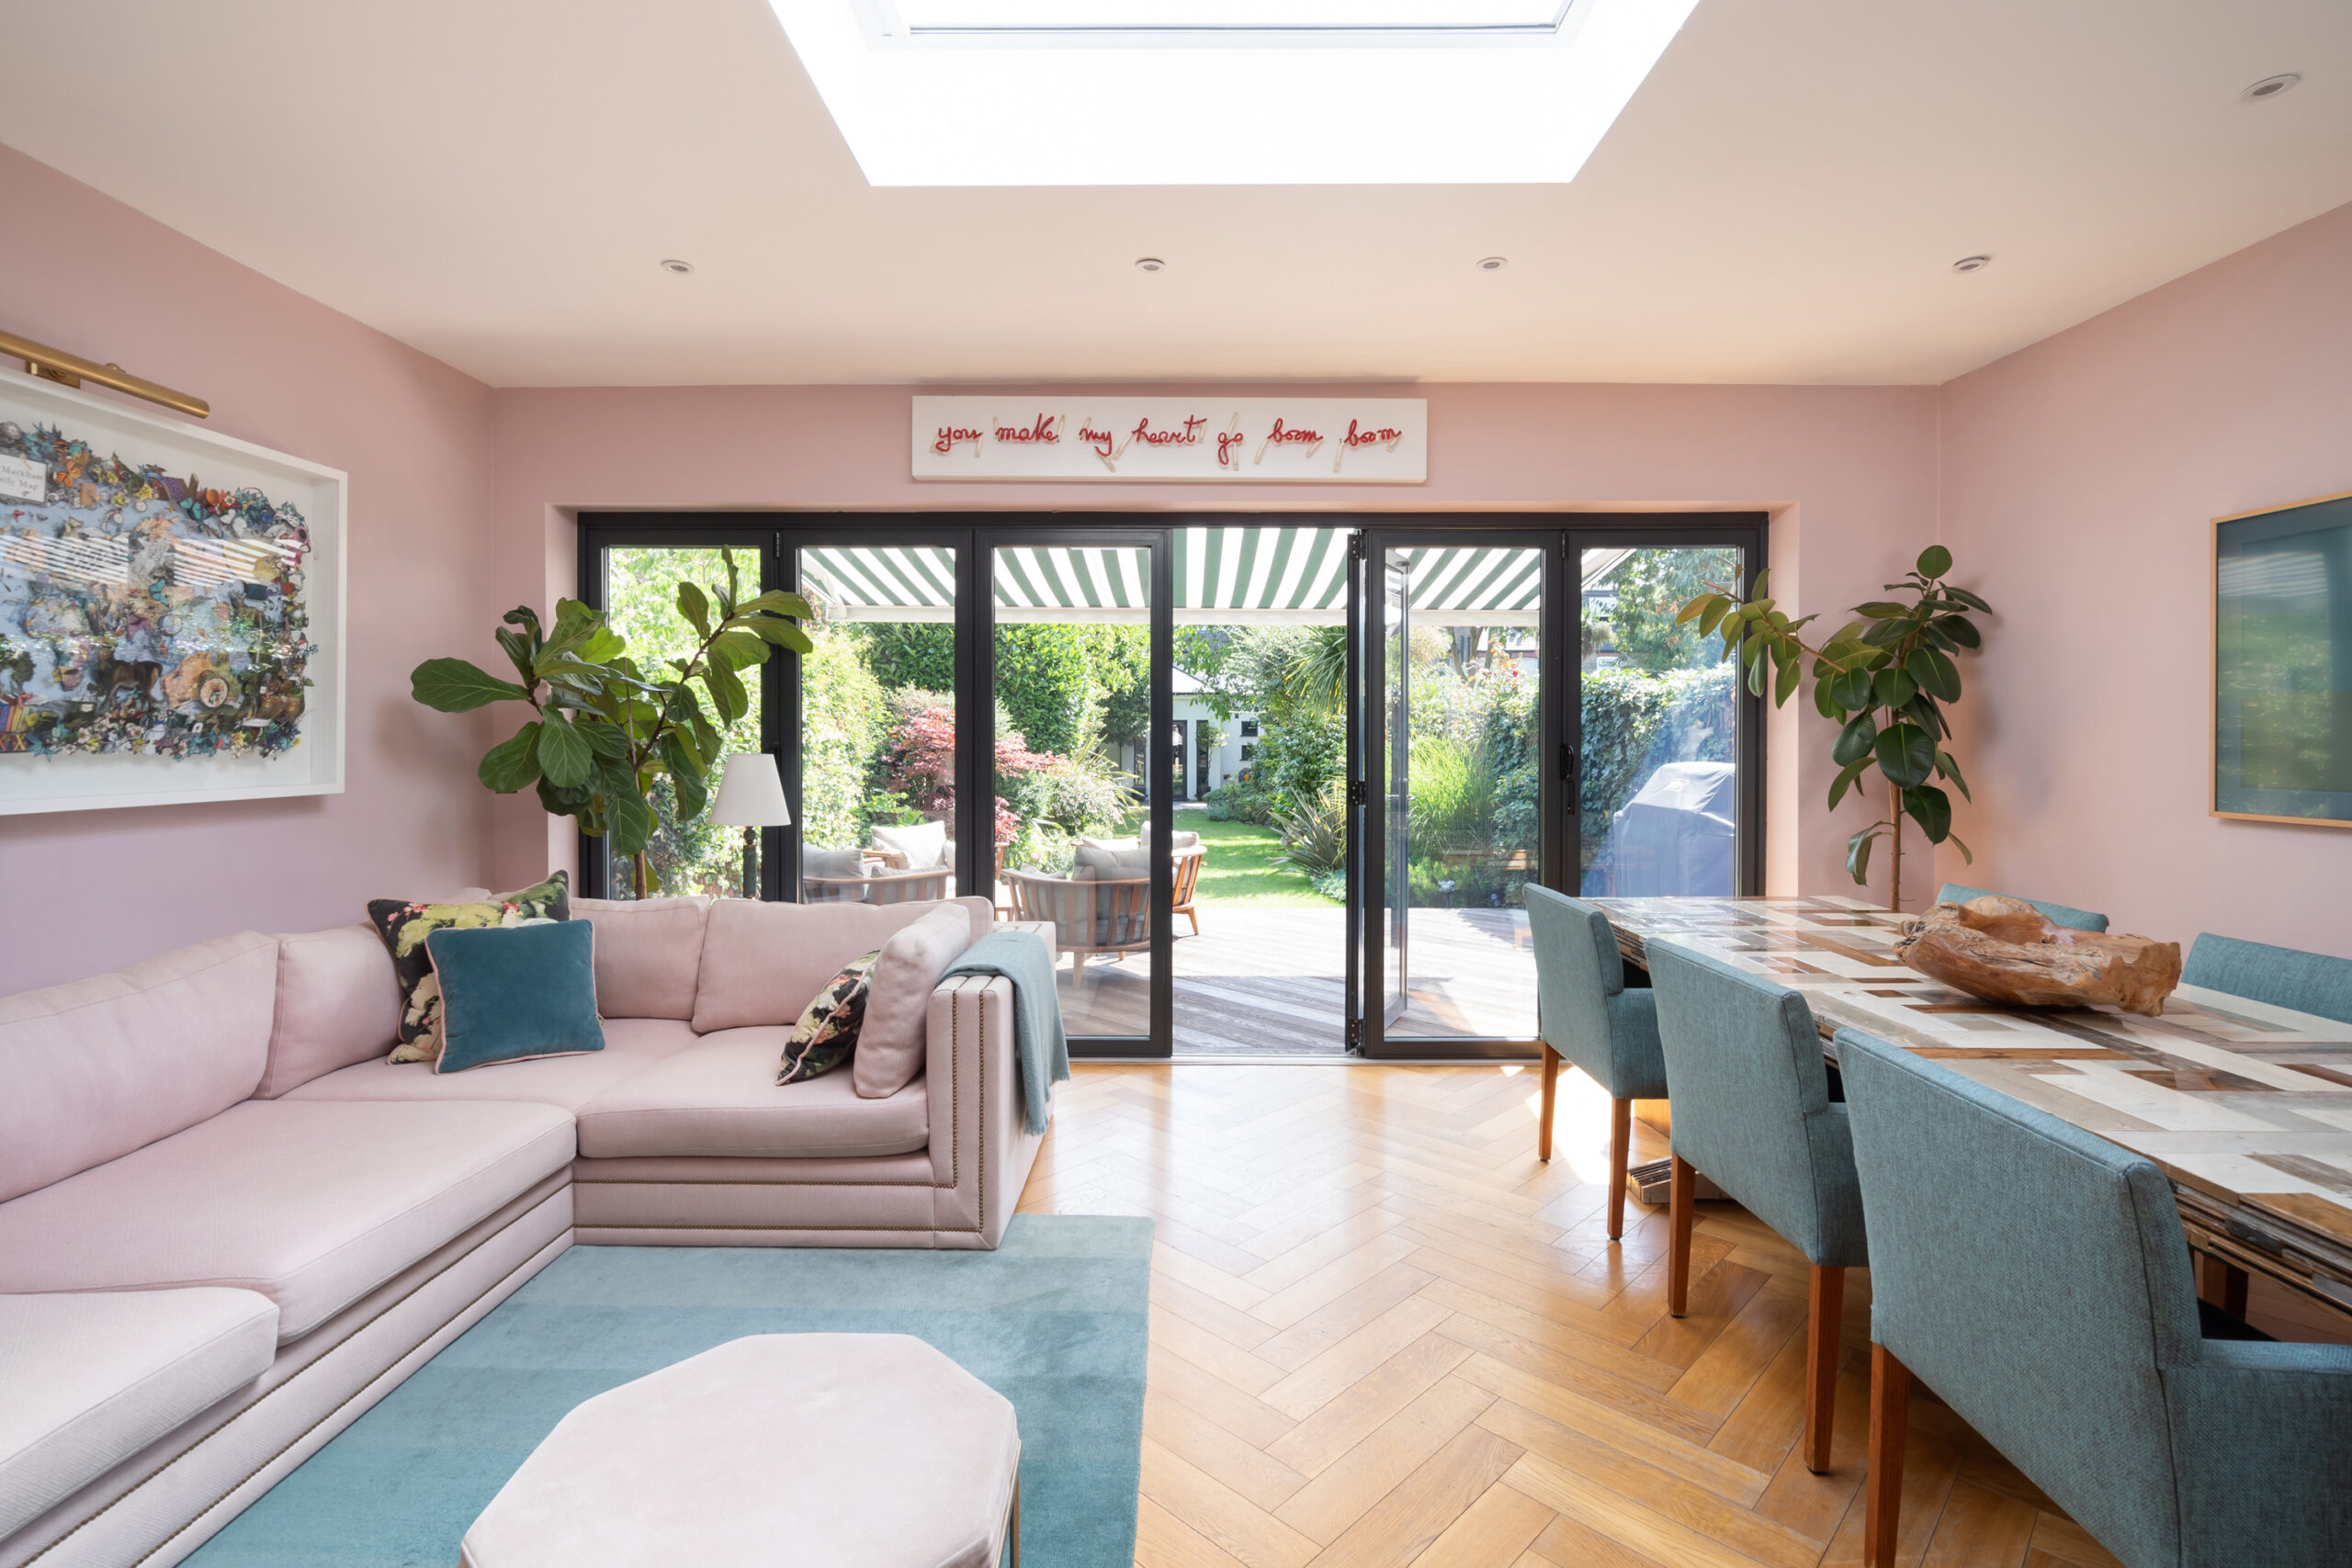 For Sale: Wormholt Road Shepherd's Bush W8 modern kitchen and living room with pink walls and a skylight